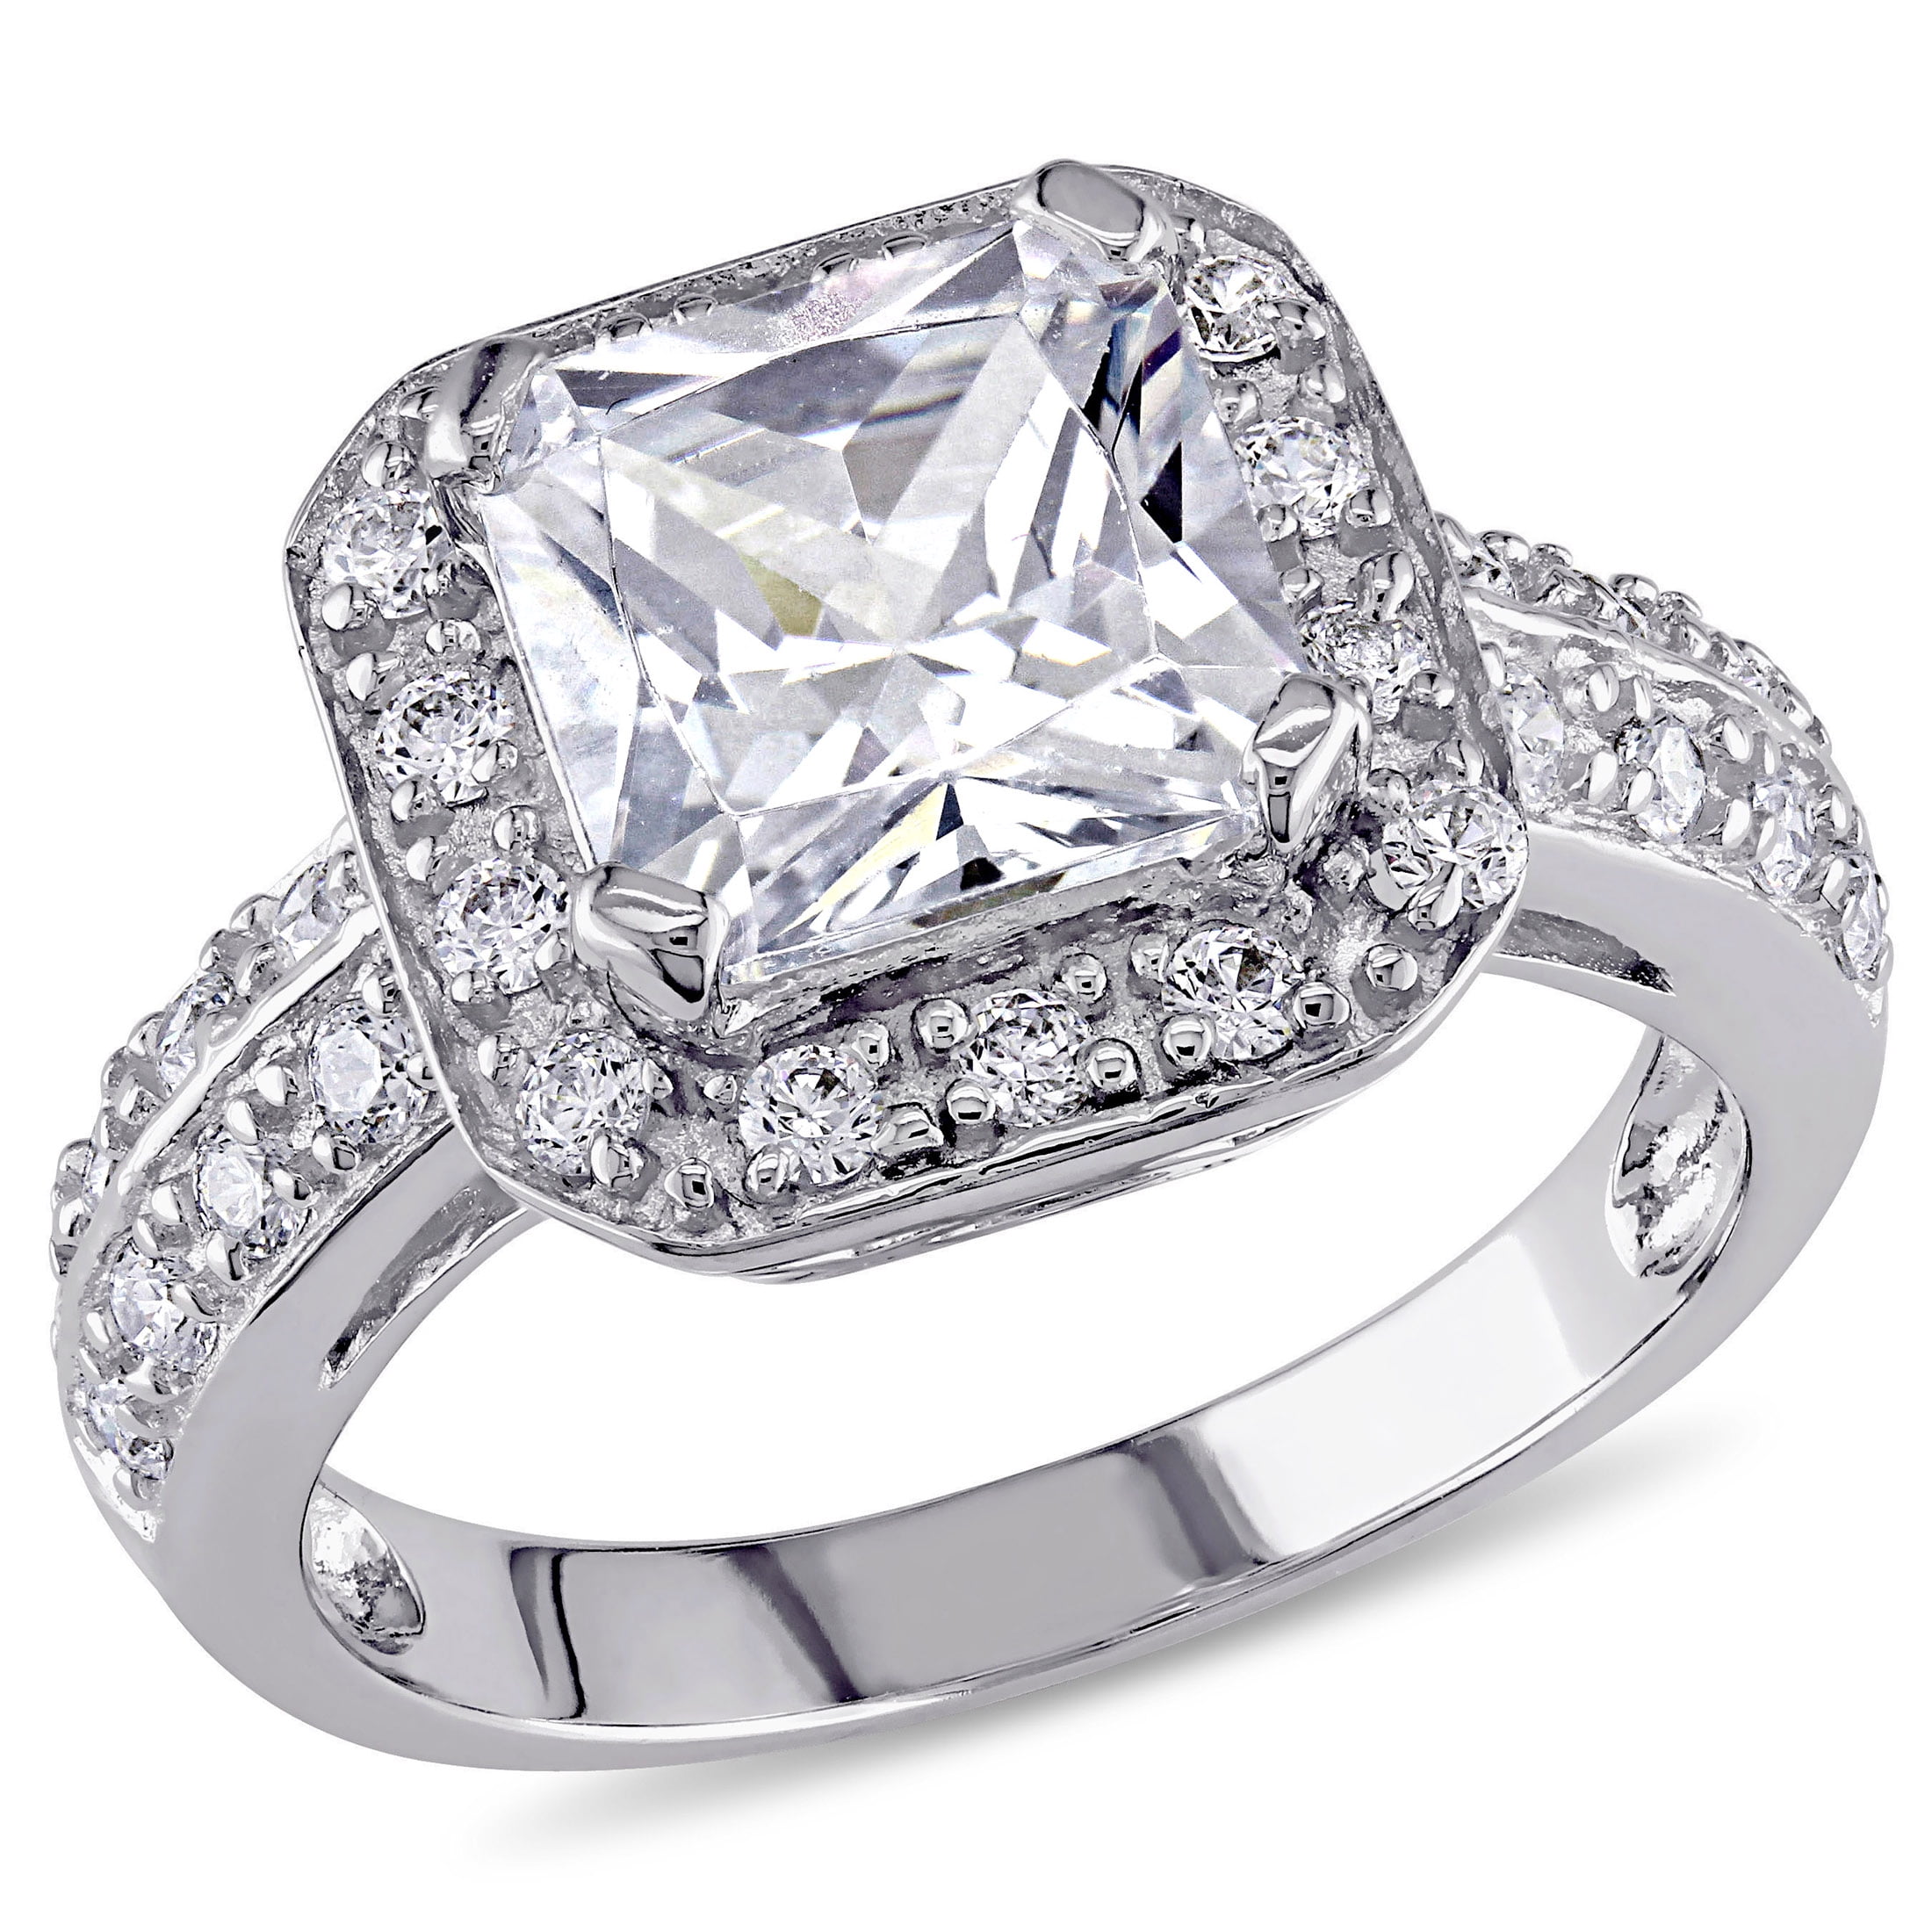 Cushion Cut Engagement Ring Elegant Unique Statement Solid 925 Sterling Silver 